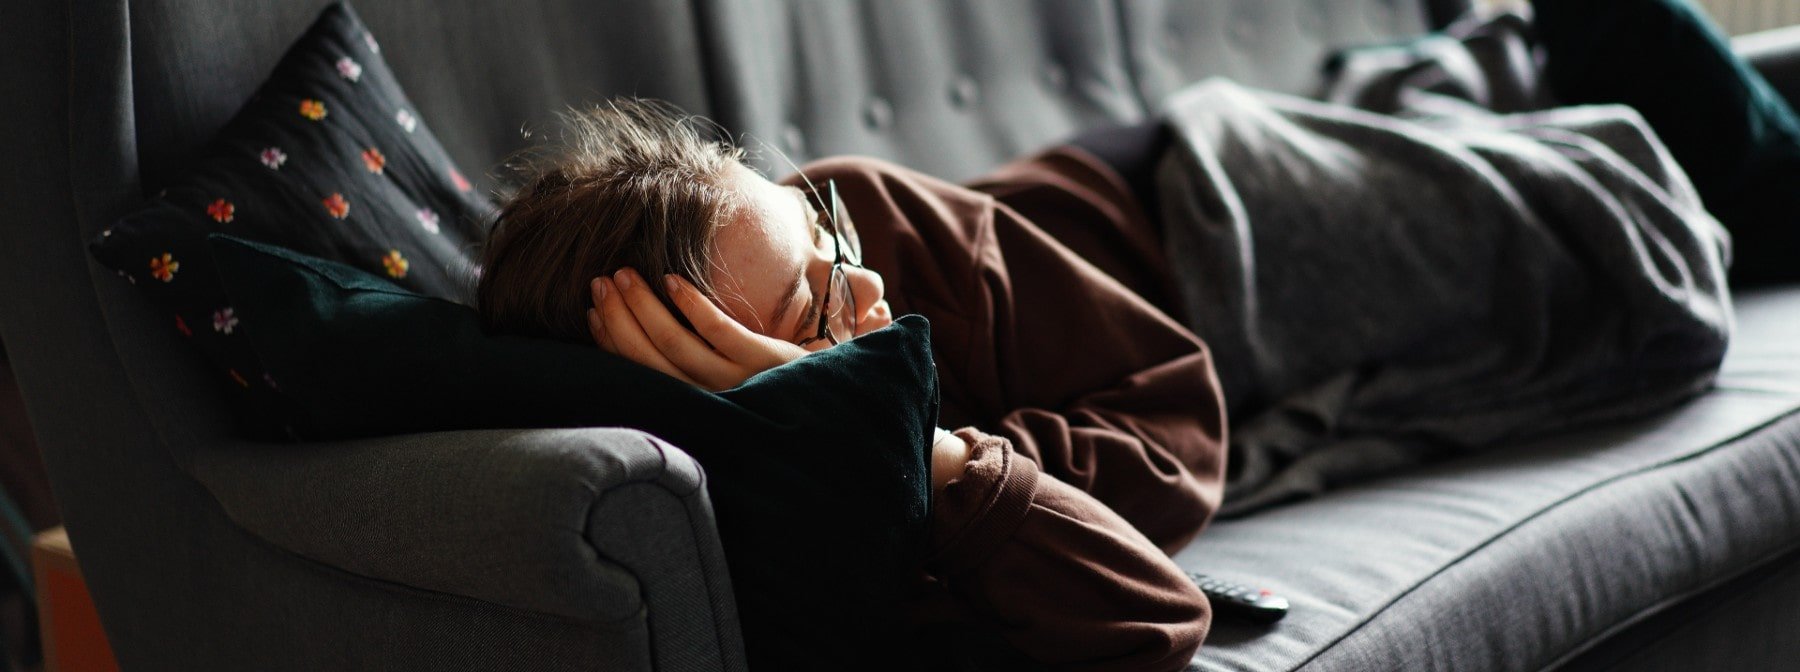 Short Naps Don’t Make Up For Sleep Deprivation, Study Claims